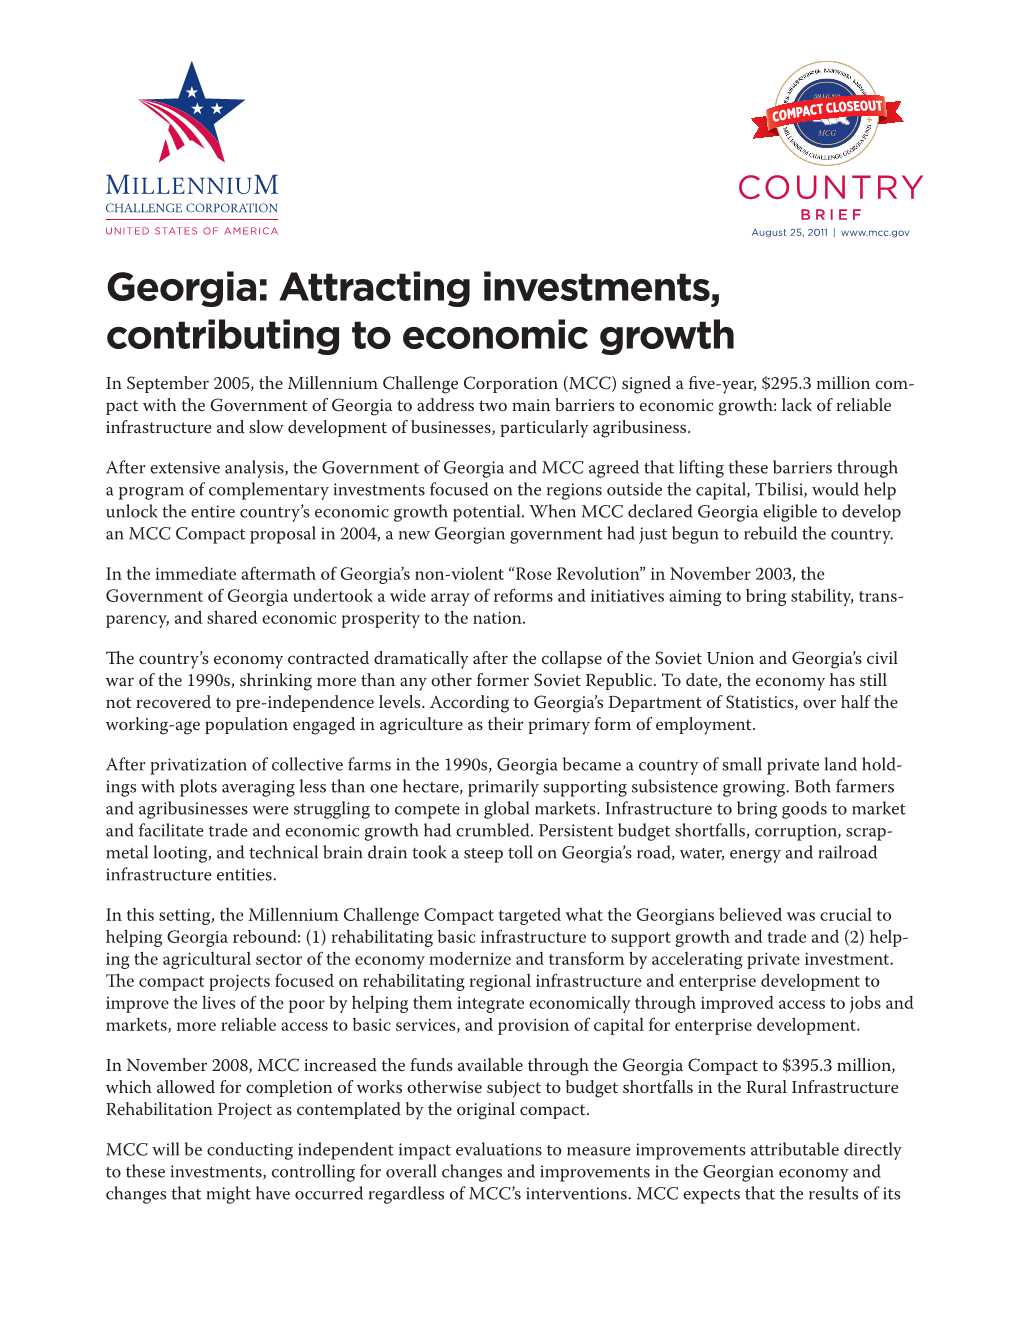 Georgia: Attracting Investments, Contributing to Economic Growth